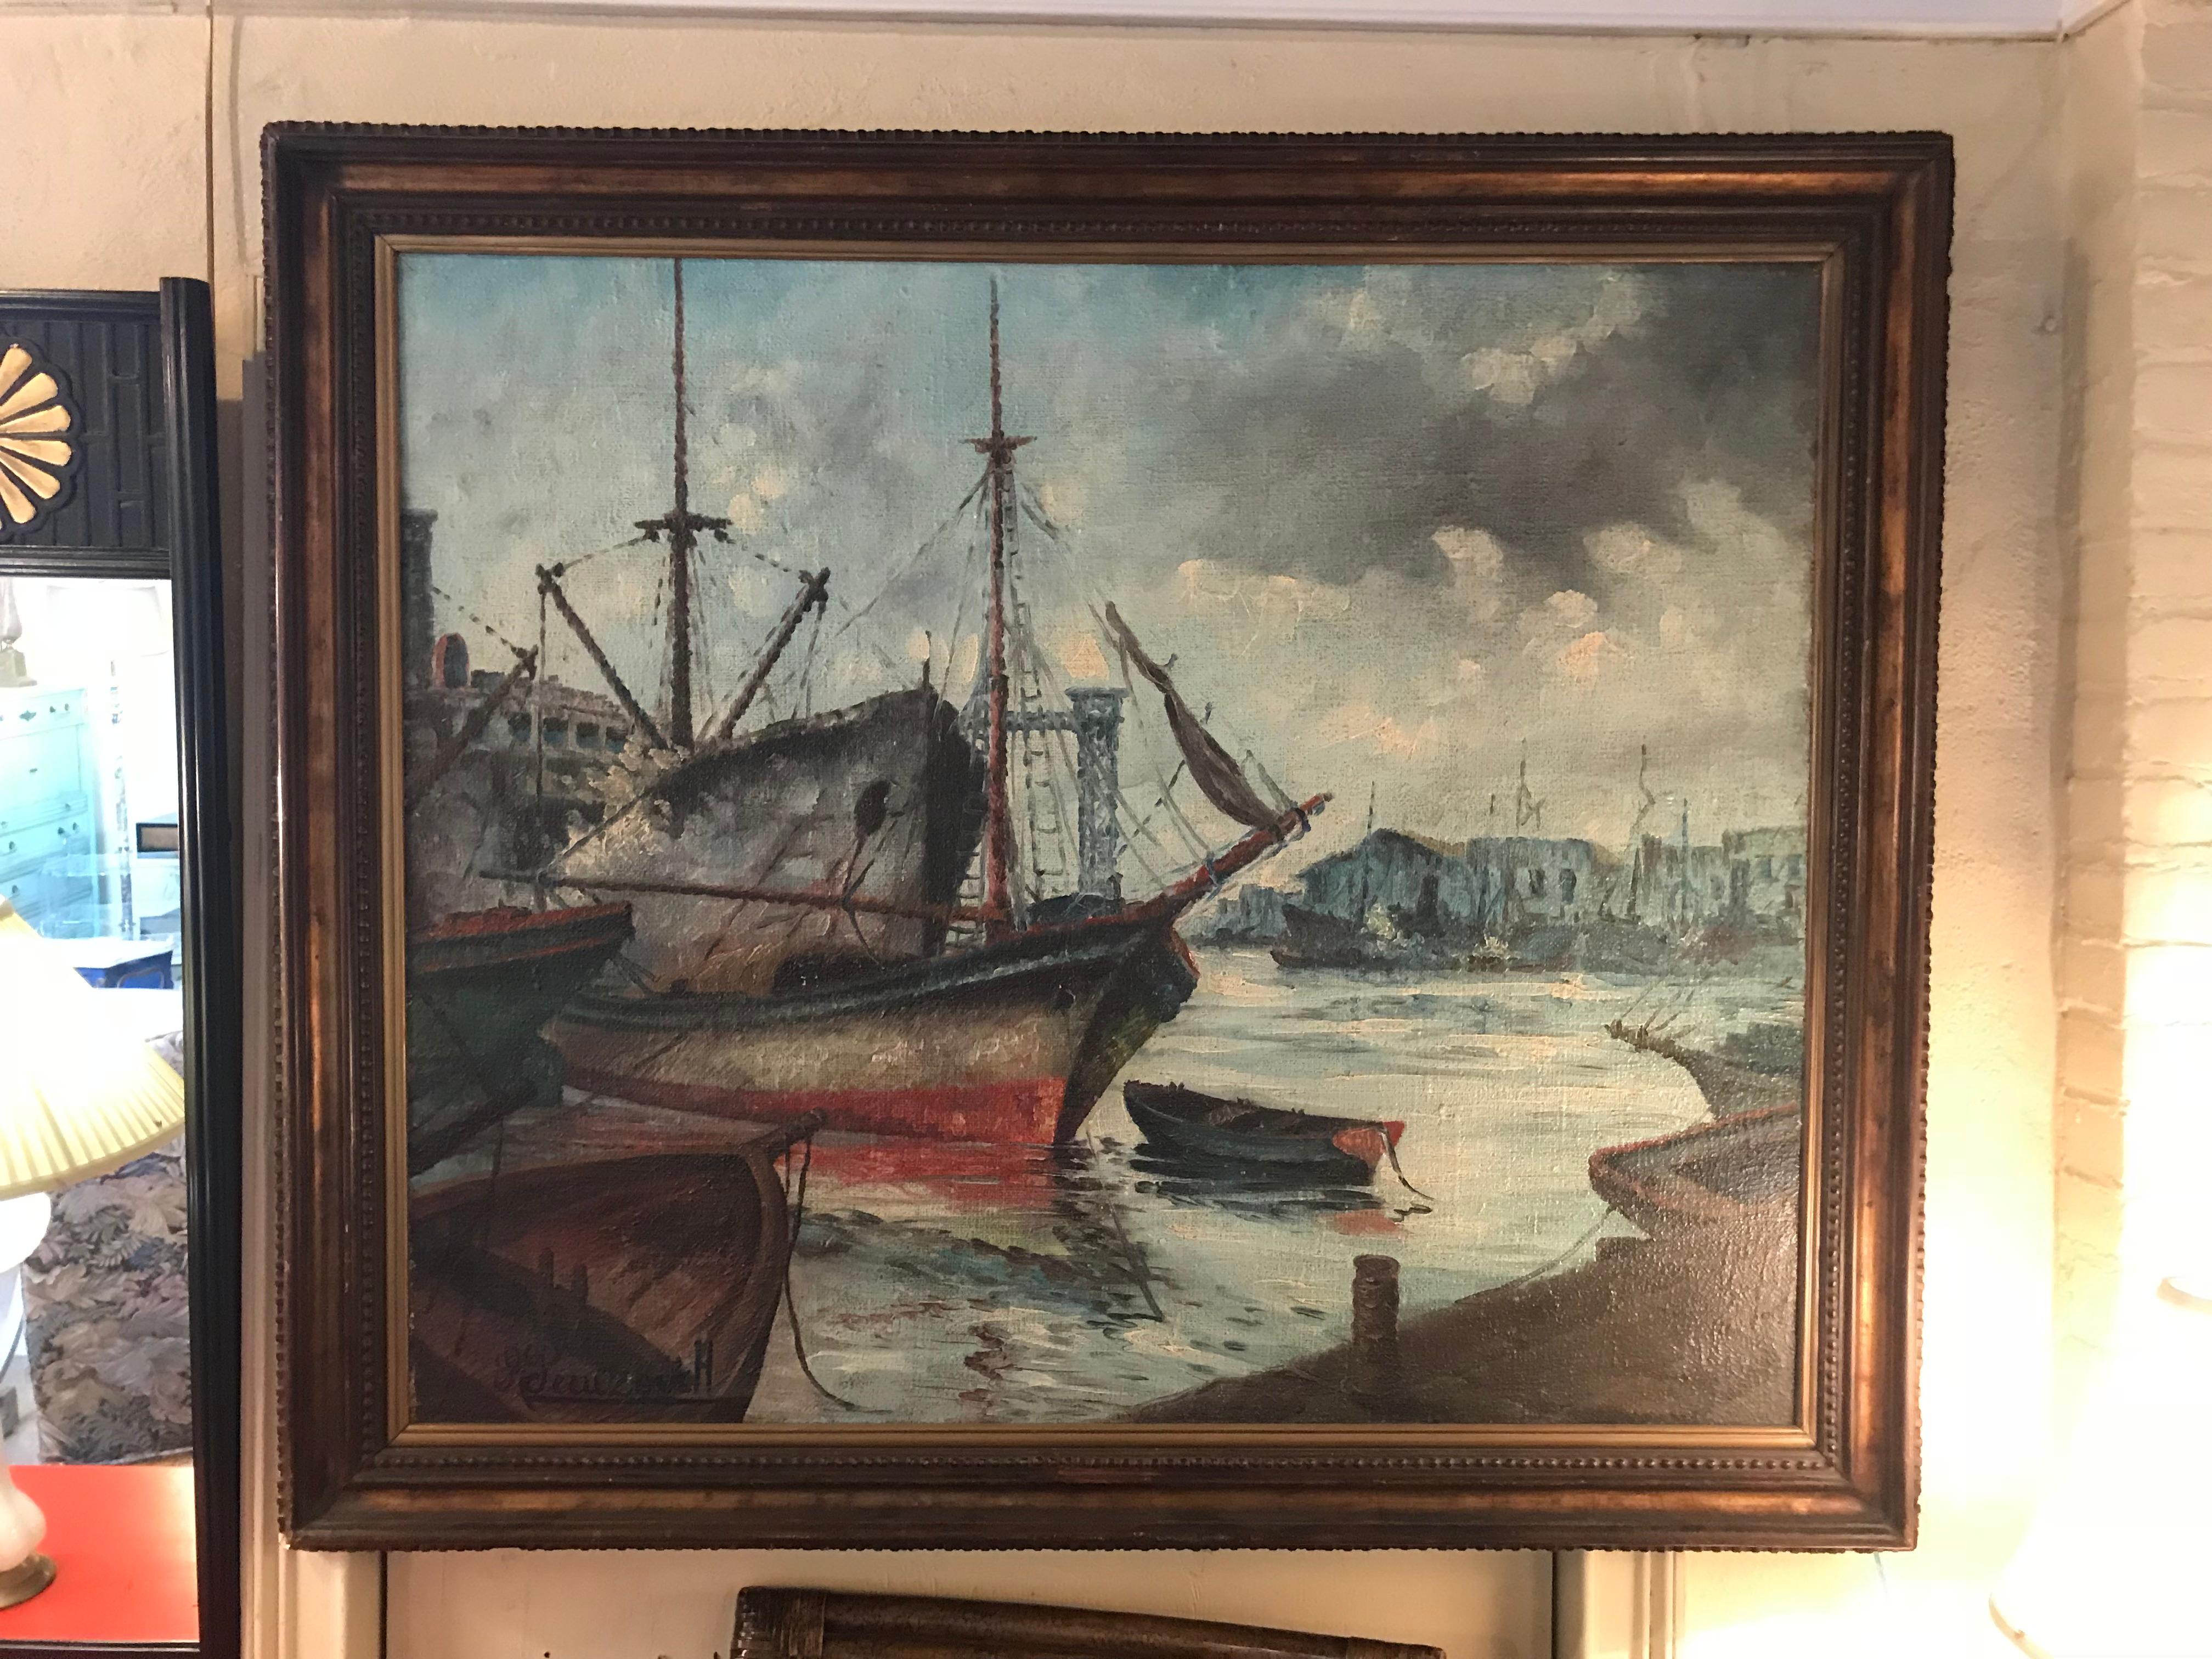 Signed 19th or early 20th century oil painting boats docked at the port. This finely detailed oil on canvas depicts several boats and fishing vessels docked at the port on a cloudy day. Set in a custom gilt gold and ebony frame signed in the lower